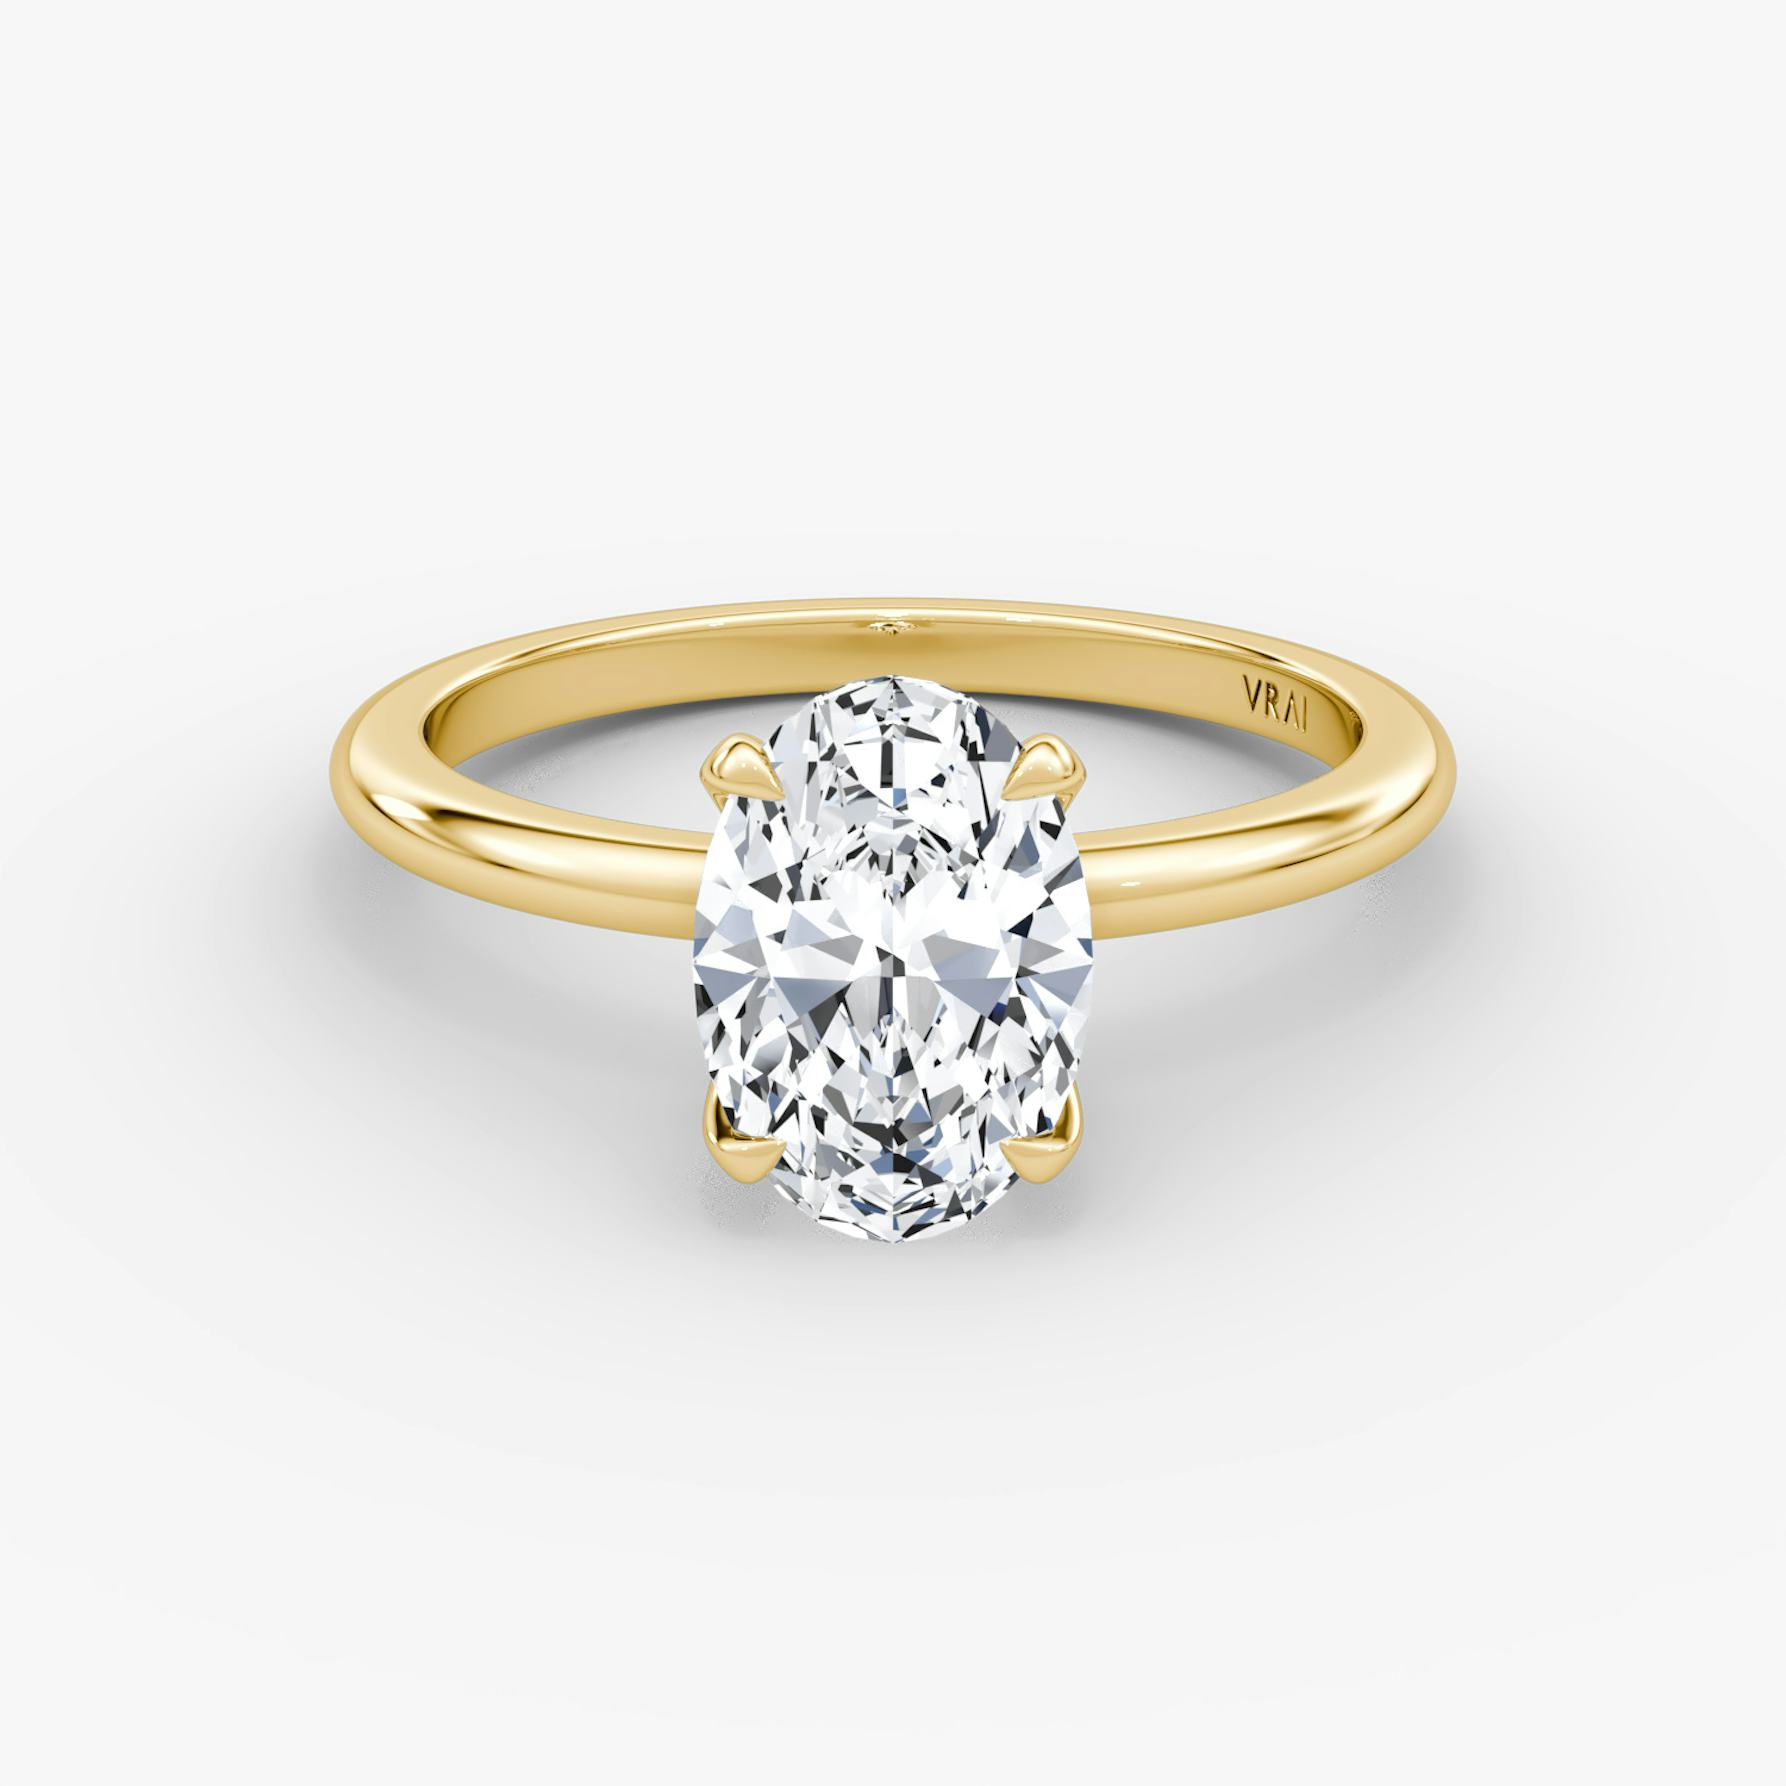 The Classic Oval Engagement Ring in Yellow gold | VRAI